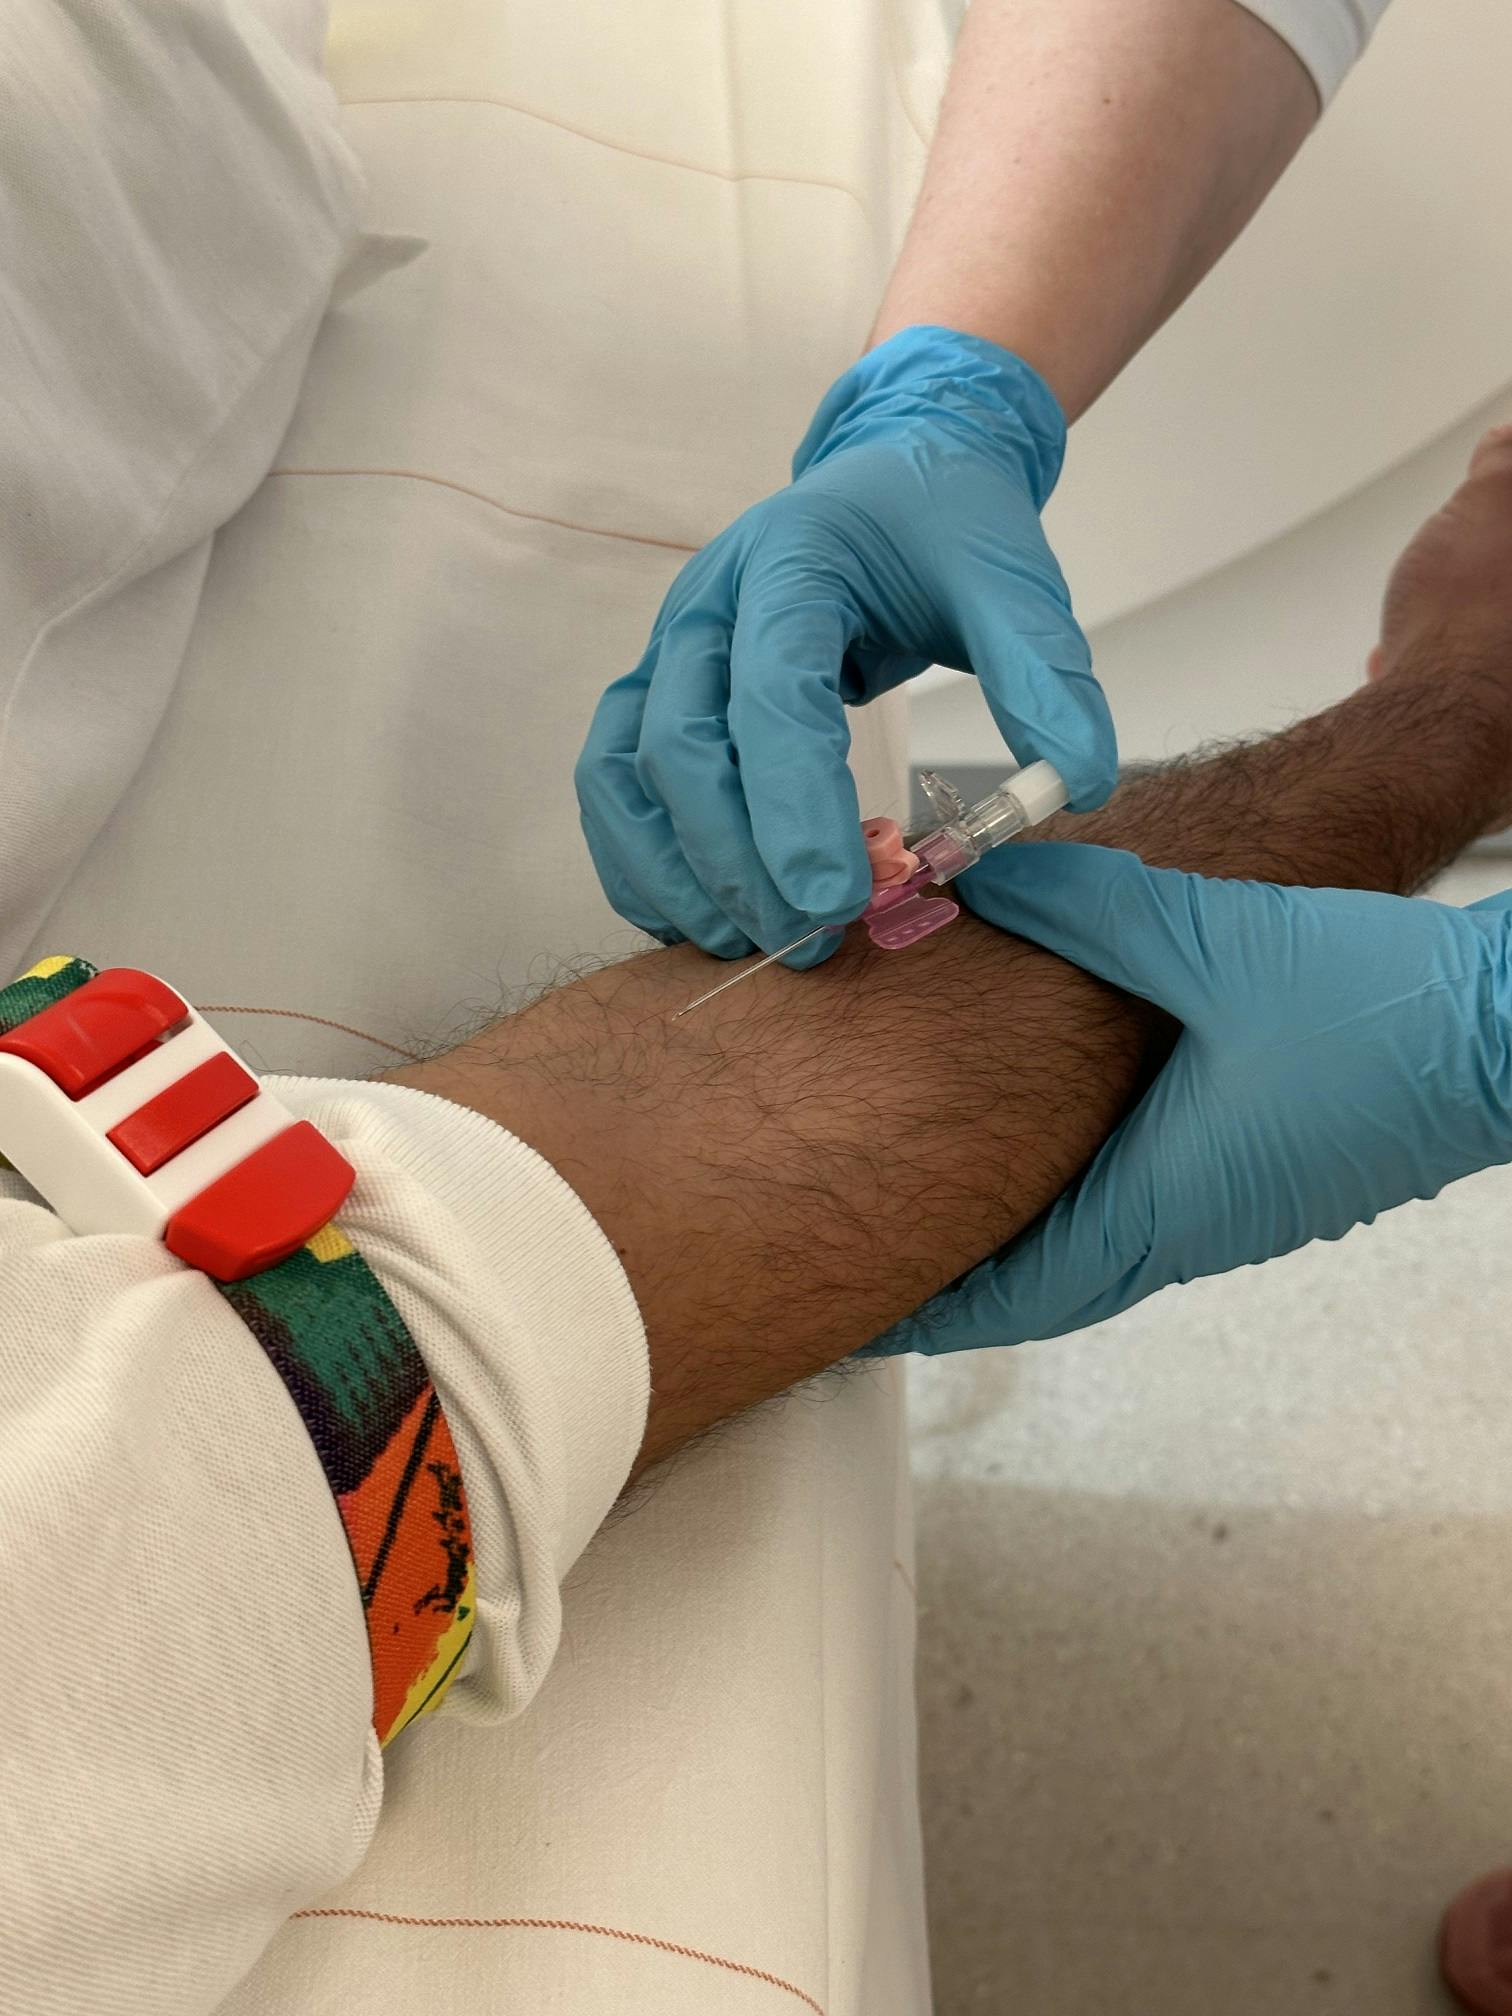 Blood sampling from the arm vein for medical tests.